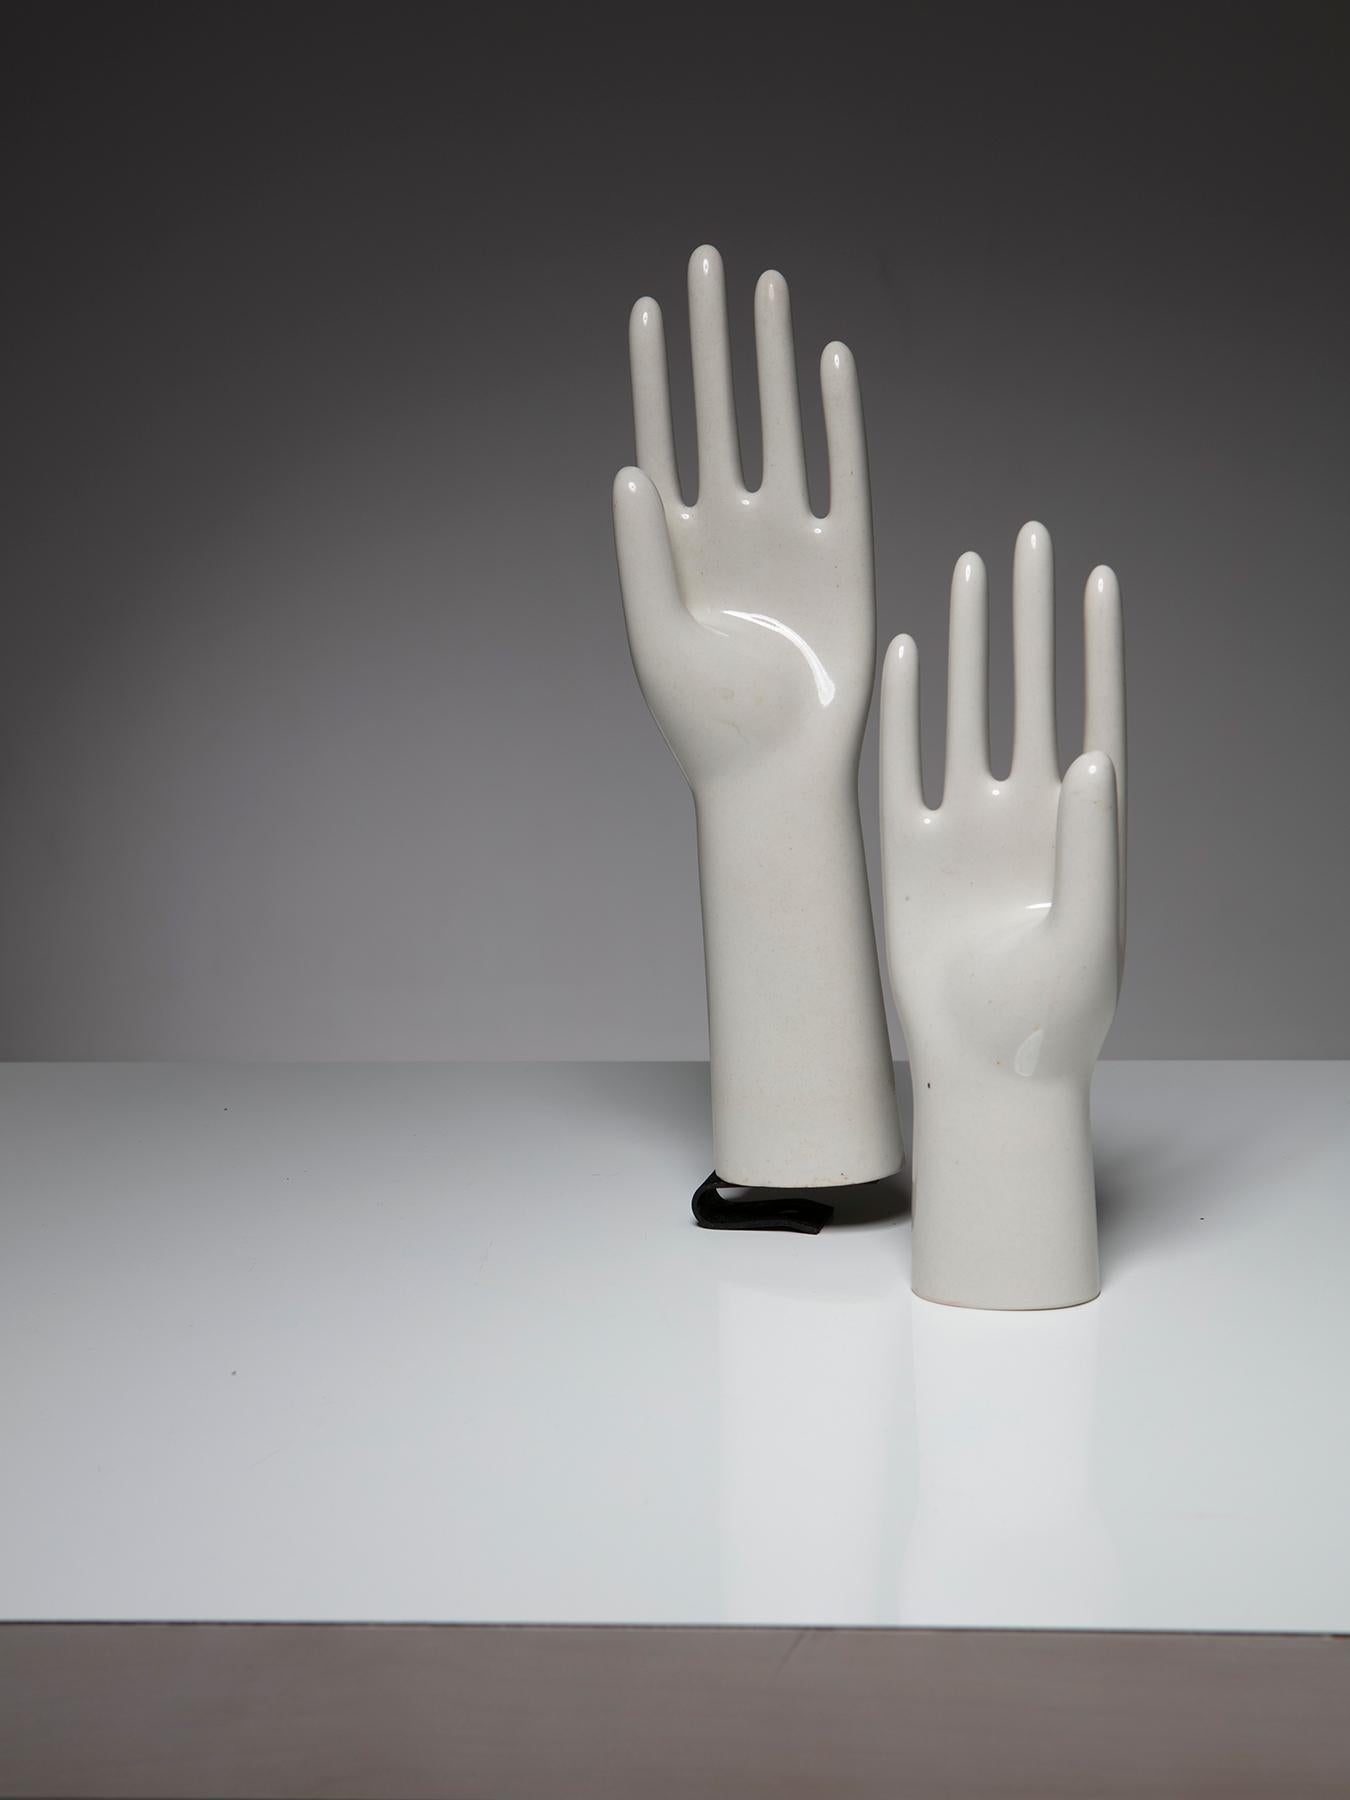 Set of two glove molds.
Porcelain pieces with left and right hands and metal support.